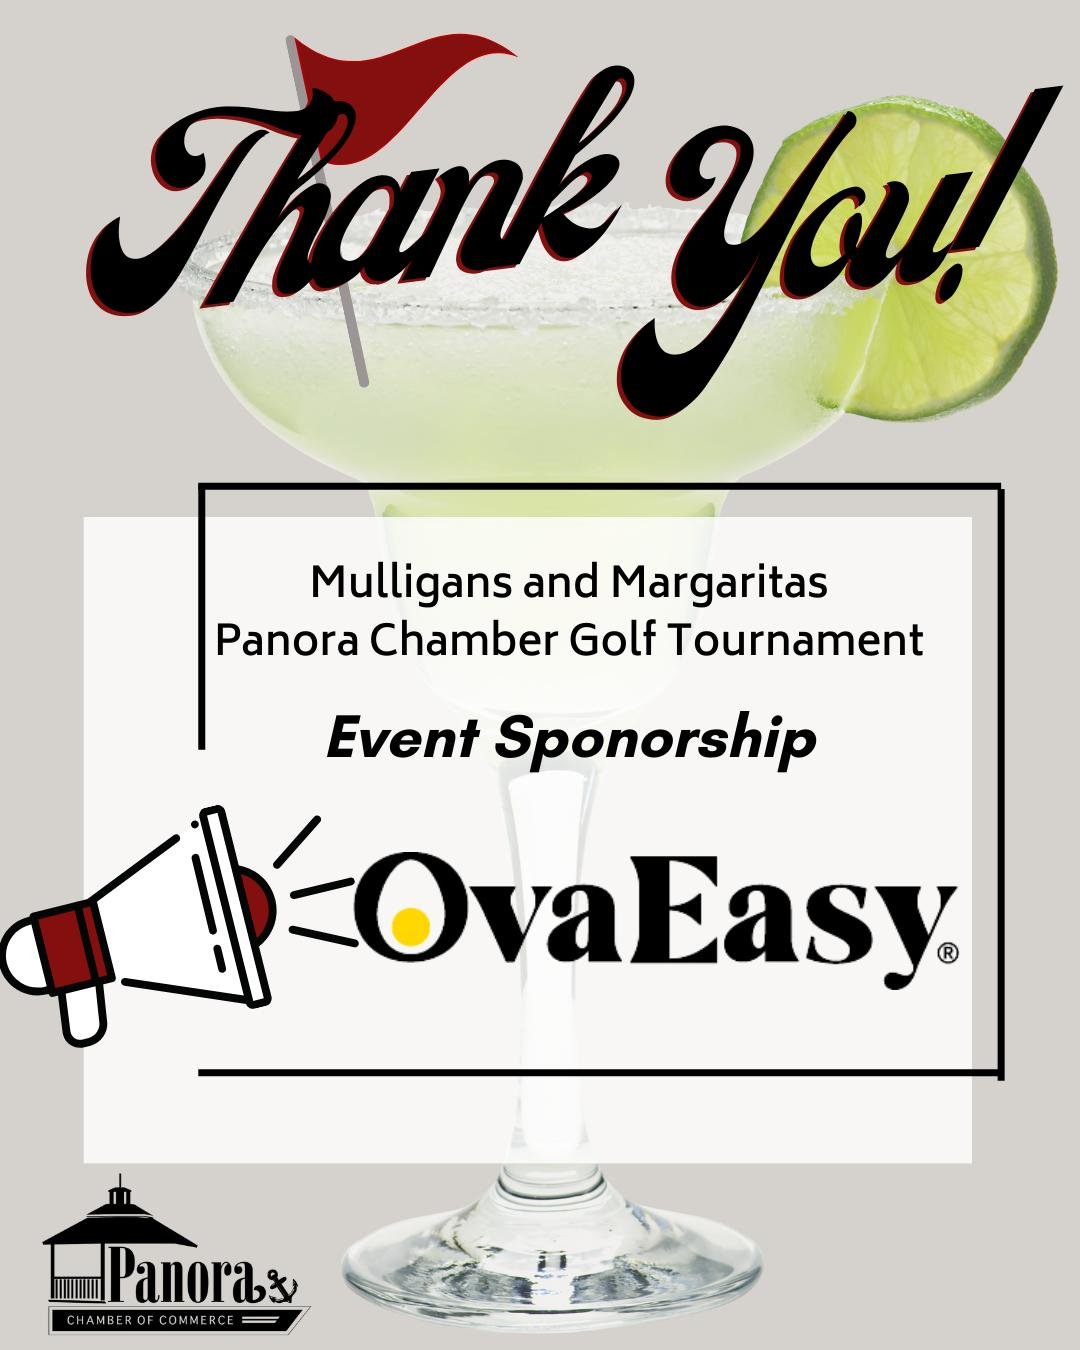 🌟 Event Sponsorship Shout-out 🌟 

We tip our glass to OvaEasy!
🍹⛳ Your support drives us closer to our goals, turning swings into celebrations at this years Mulligans and Margaritas fundraiser!

The Panora Chamber Golf event is the one fundraiser 